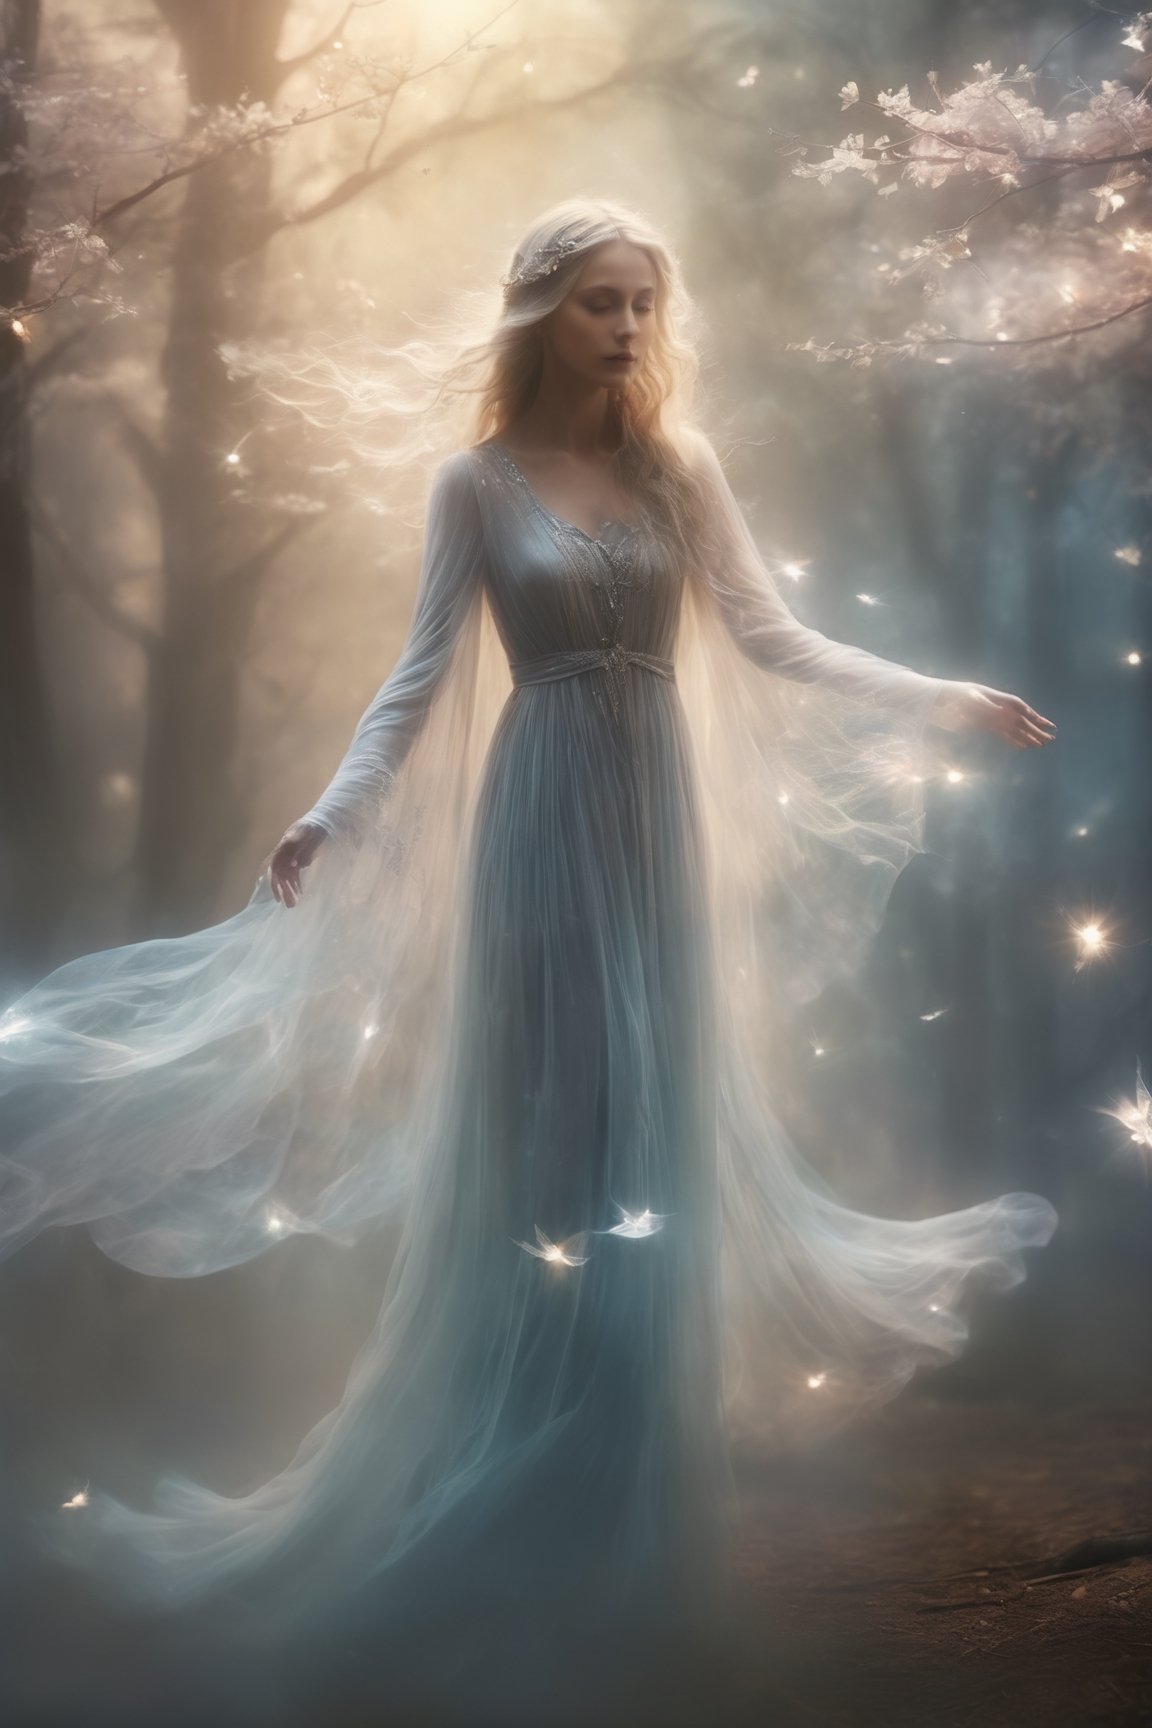 (masterpiece, best quality:1.4), (extremely detailed, 8k, uhd), fantasy art, natural lighting, ultra highres, dark yet benevolent forest setting, mysterious lighting, (transparent, ethereal, benevolent:1.2), (sharp focus:1.3), 1character, the Gentle Ghost, a transparent and kind female spirit, (transparent:1.5), veil, gentle, peacefully haunting a dark yet benevolent forest, (gentle posture, serene expression:1.2), (detailed features, ethereal presence:1.6), (soft and kind eyes, calming gaze:1.3), (surrounded by the subtle glow of fireflies and other ghostly elements:1.2), (floating stance:1.3), (soft moonlight filtering through the trees:1.6), (flowing, ethereal garments:1.3), intricate details, (depth of field, tranquil atmosphere), nighttime, enchanting, detailed background, fantasy, hyper-detailed,ice and water